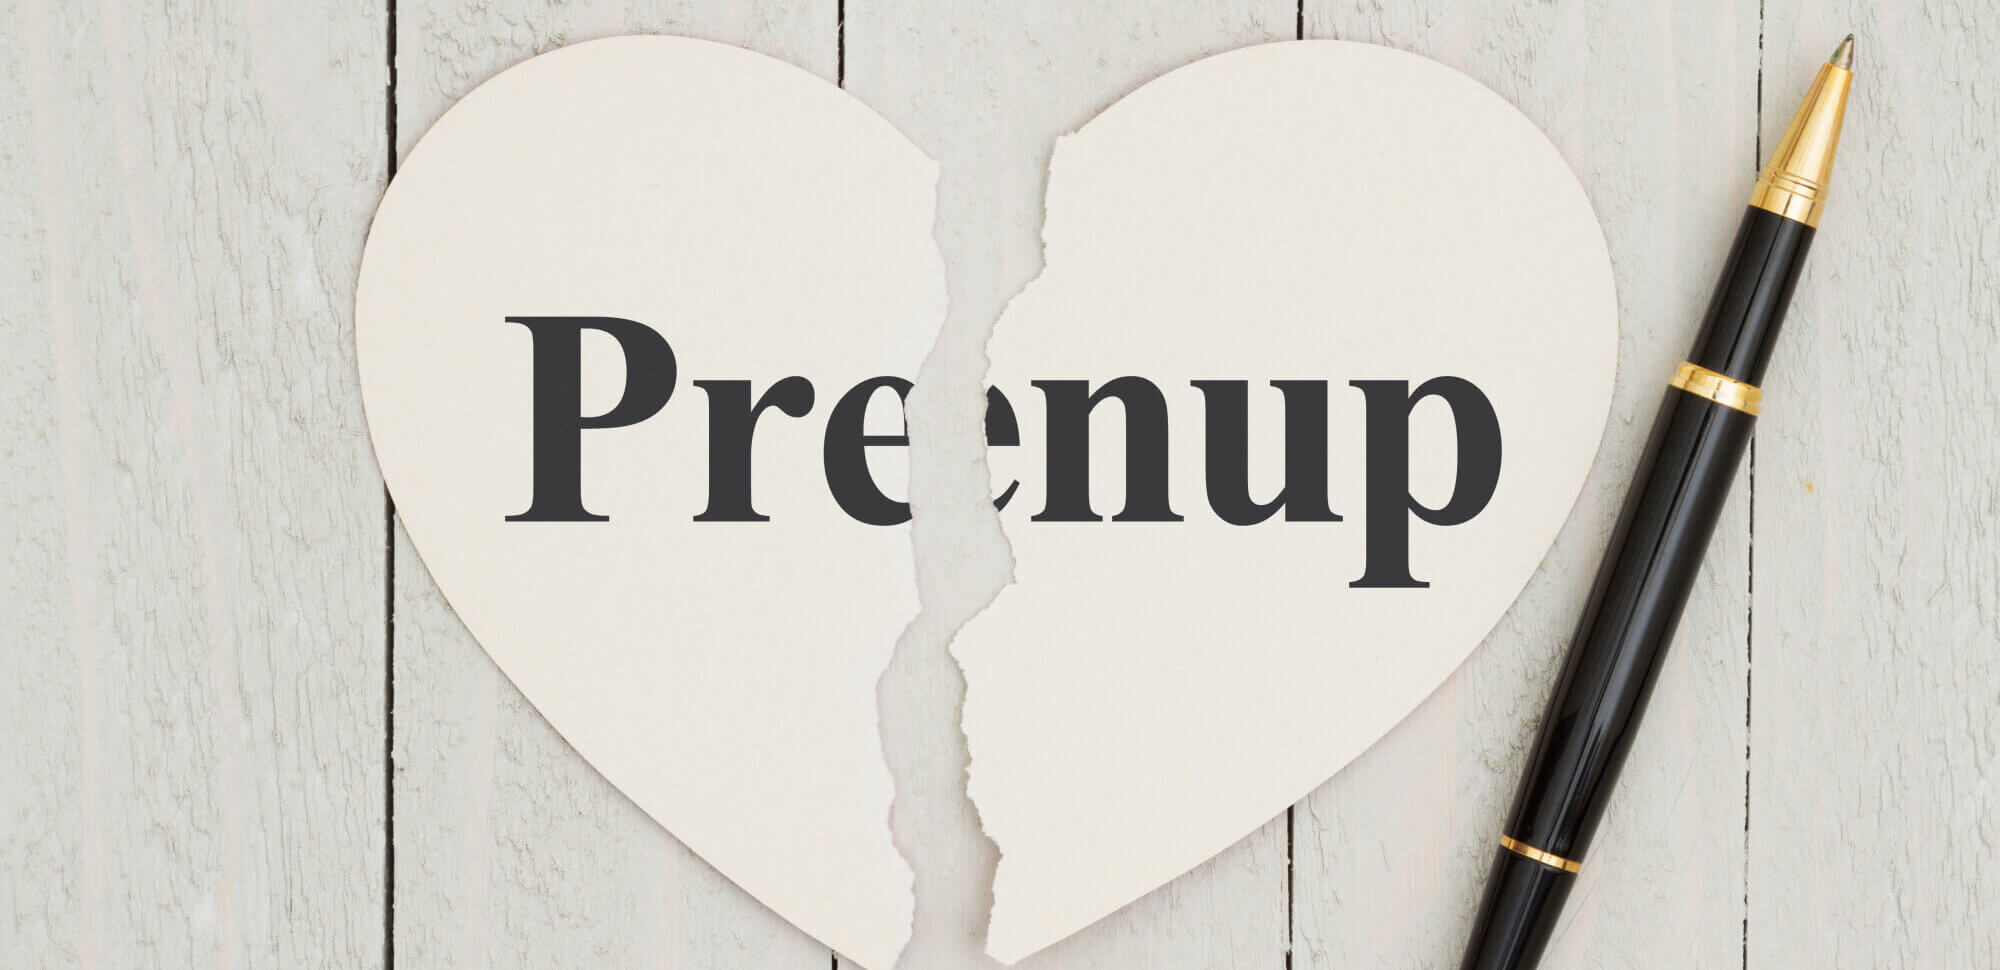 prenup text on heart with pen